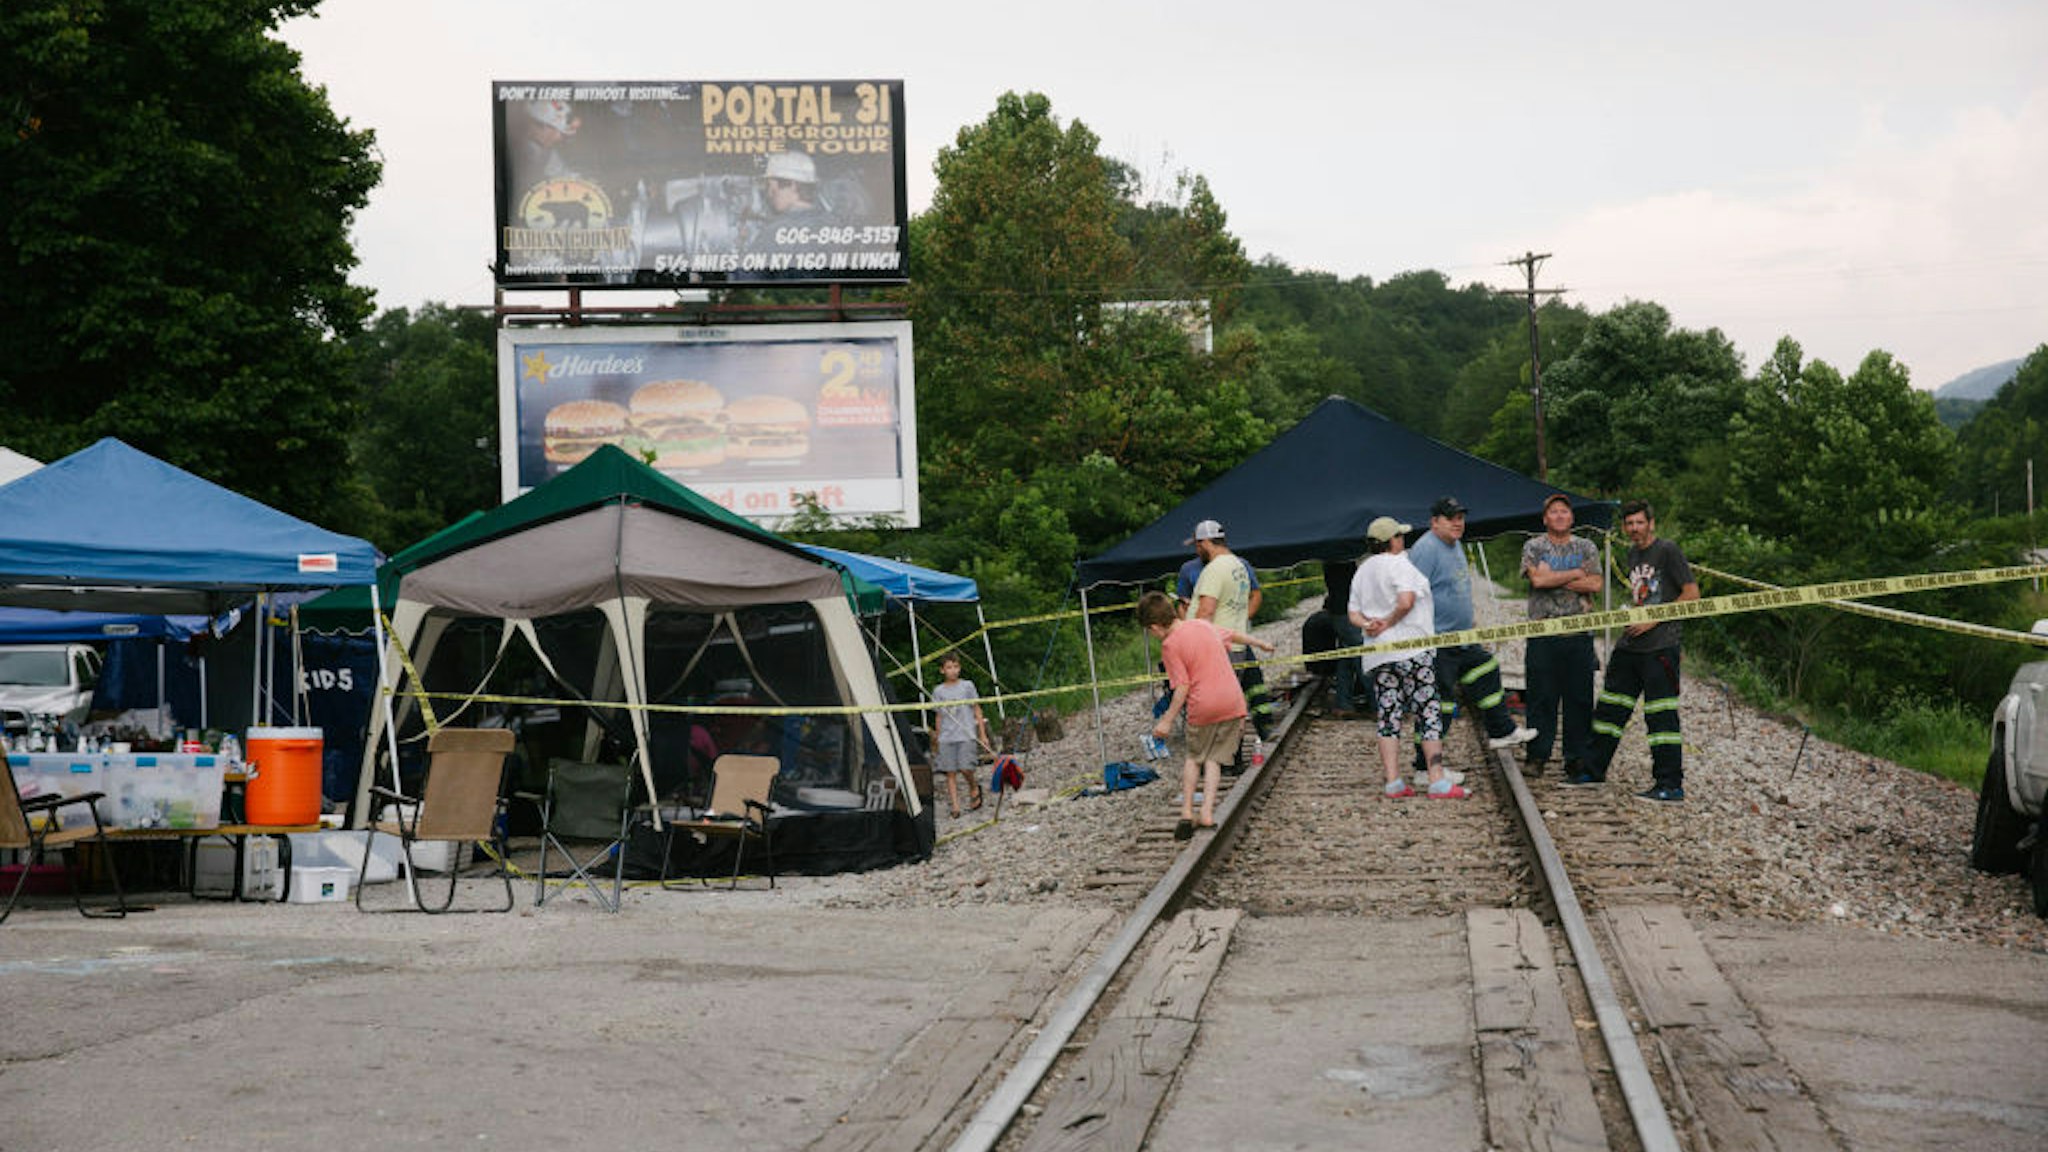 Supporters of miners stand on train tracks in Cumberland, Kentucky, U.S., on Friday, Aug. 2, 2019. The miners have been working in shifts to block railroad tracks leading to a Blackjewel mine outside since Monday afternoon, Harlan County Judge-Executive Dan Mosley said in an interview. They're demanding back pay for work done in weeks leading up to the bankruptcy, after checks issued by Blackjewel bounced or never arrived. Photographer: Meg Roussos/Bloomberg via Getty Images